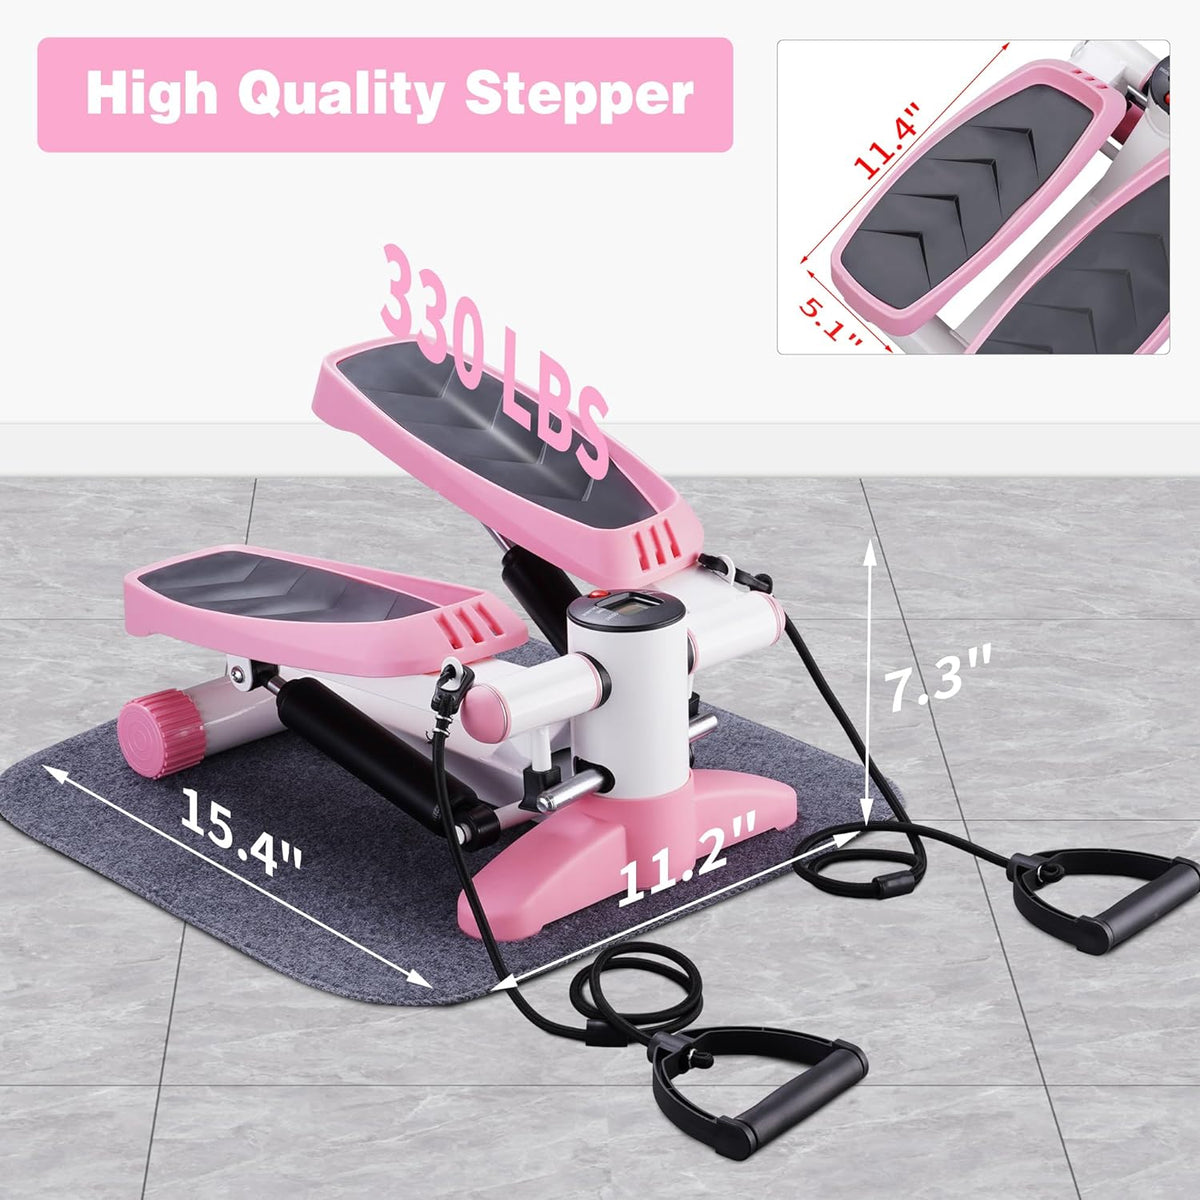 ZENOVA Mini Stepper Steppers for Exercise,  Exercise Equipment with Resistance Bands, Stair Stepper with 330lbs Weight Capacity for Home Workouts